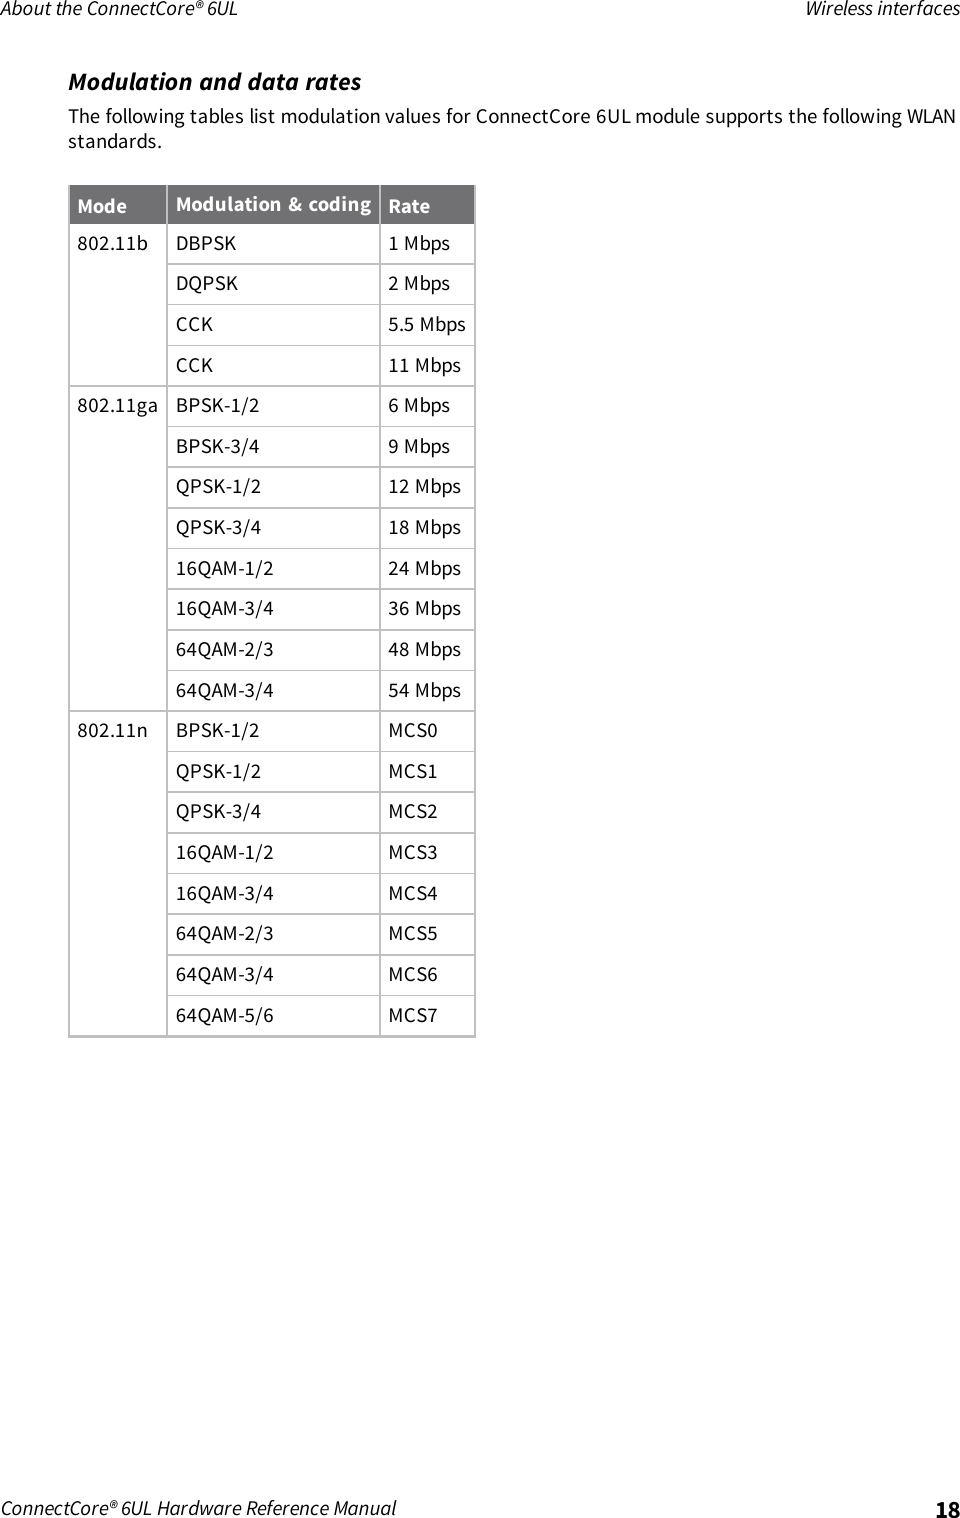 About the ConnectCore® 6UL Wireless interfacesConnectCore® 6UL Hardware Reference Manual 18Modulation and data ratesThe following tables list modulation values for ConnectCore 6UL module supports the following WLANstandards.Mode Modulation &amp; coding Rate802.11b DBPSK 1 MbpsDQPSK 2 MbpsCCK 5.5 MbpsCCK 11 Mbps802.11ga BPSK-1/2 6 MbpsBPSK-3/4 9 MbpsQPSK-1/2 12 MbpsQPSK-3/4 18 Mbps16QAM-1/2 24 Mbps16QAM-3/4 36 Mbps64QAM-2/3 48 Mbps64QAM-3/4 54 Mbps802.11n BPSK-1/2 MCS0QPSK-1/2 MCS1QPSK-3/4 MCS216QAM-1/2 MCS316QAM-3/4 MCS464QAM-2/3 MCS564QAM-3/4 MCS664QAM-5/6 MCS7